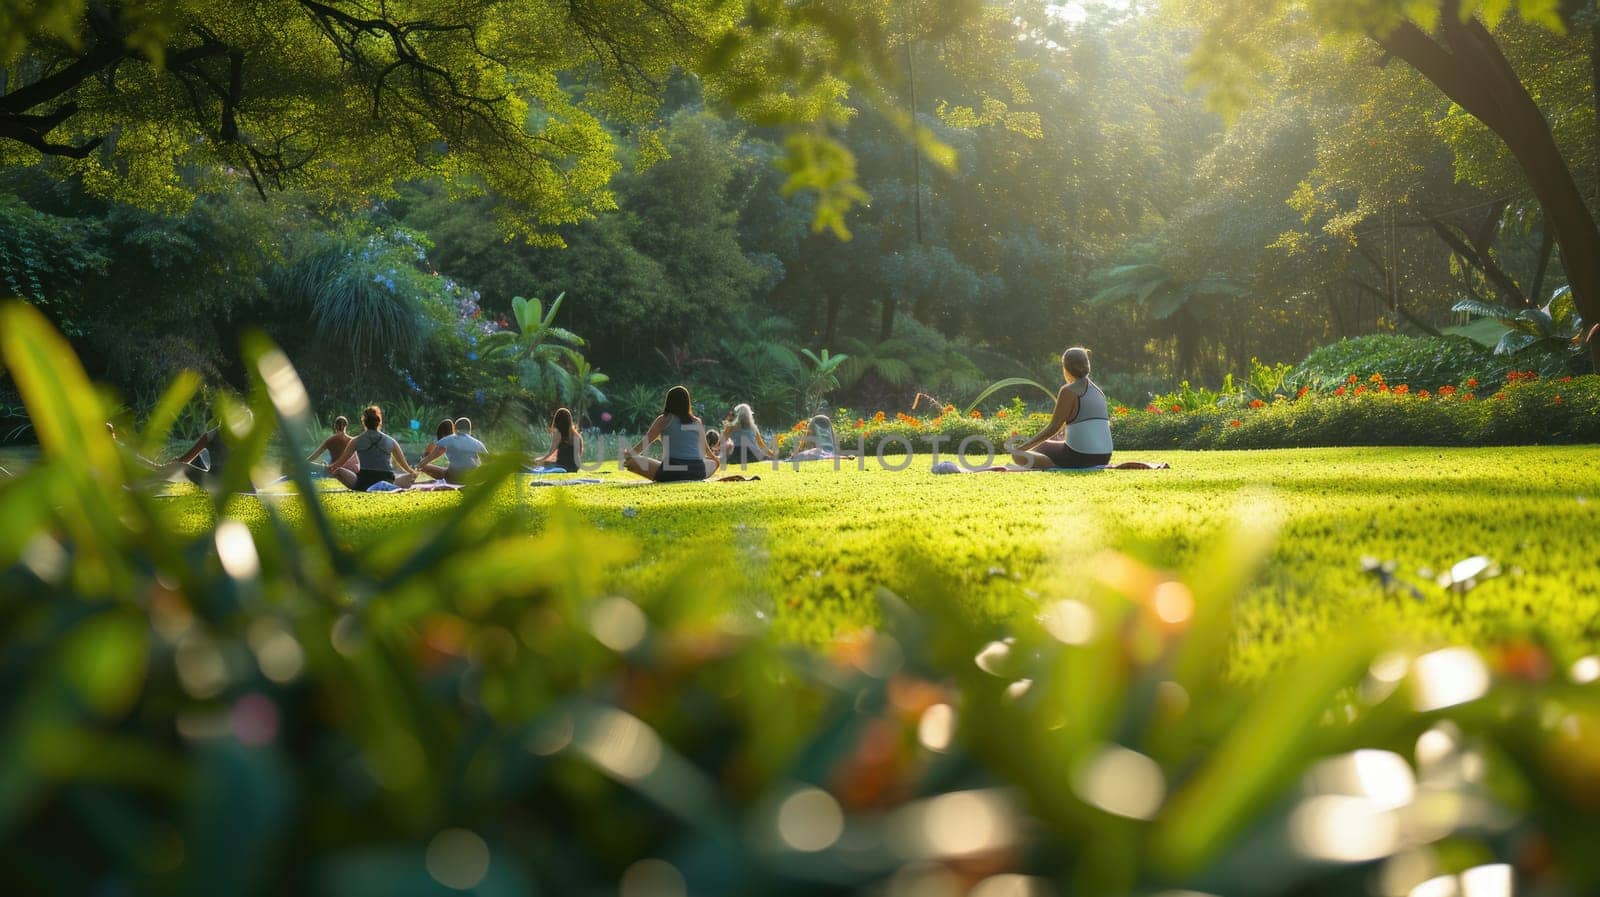 Outdoor Yoga Class in Lush Garden Setting AIG41 by biancoblue